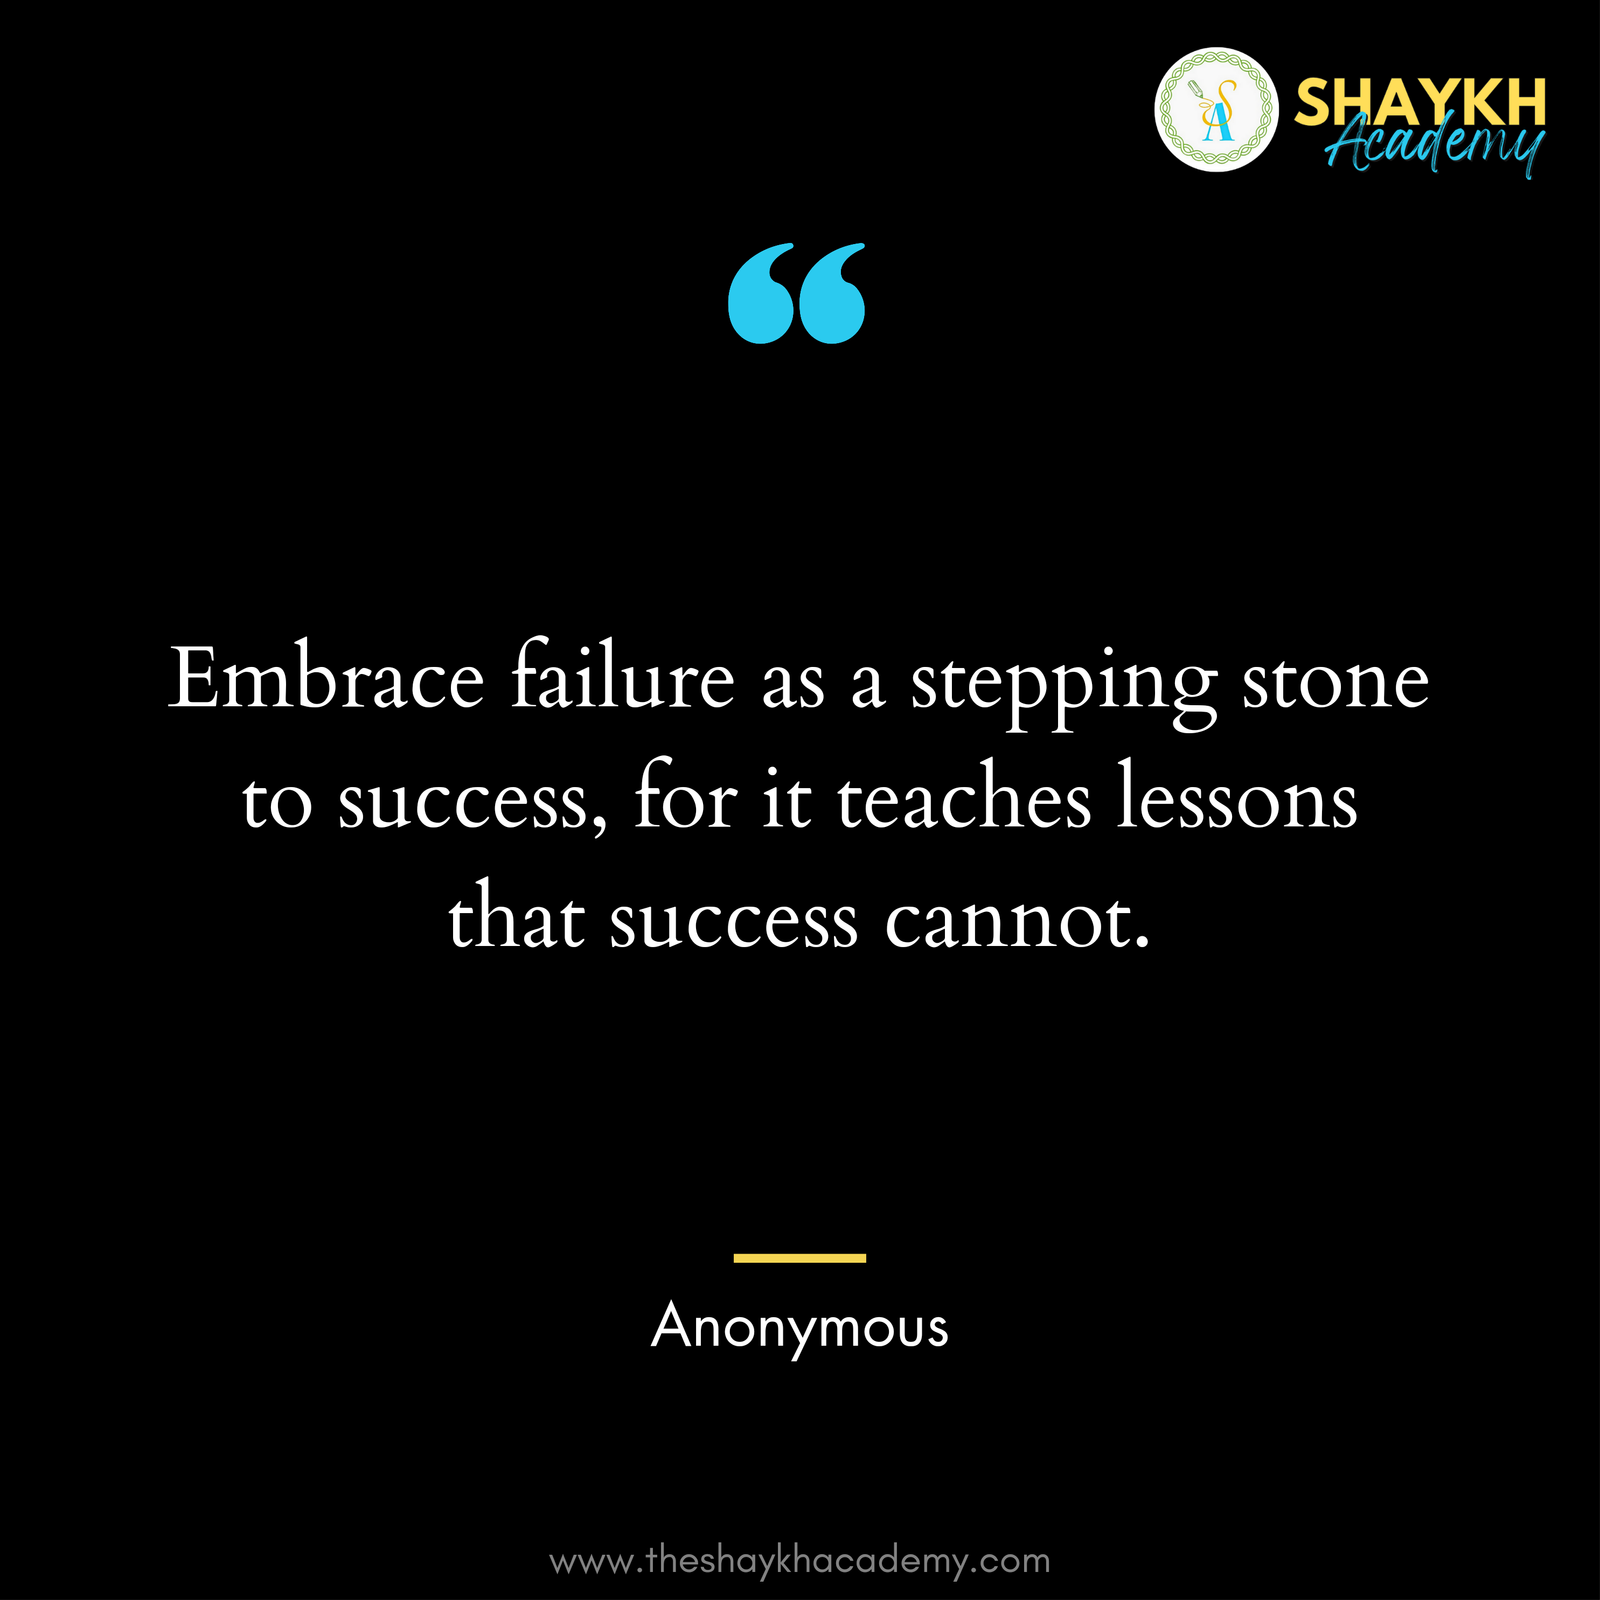 Embrace failure as a stepping stone to success, for it teaches lessons that success cannot.